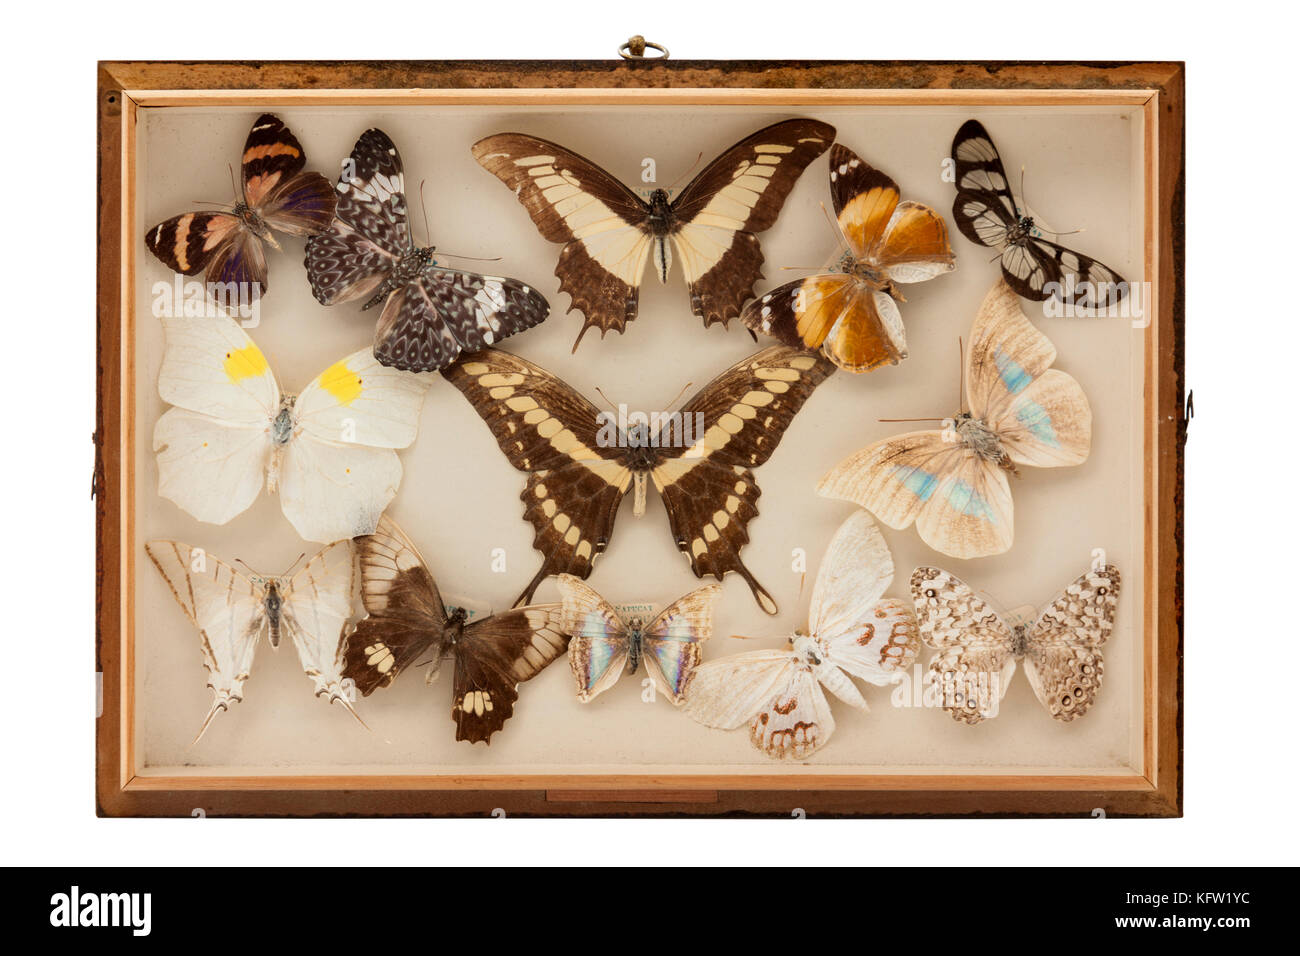 Vintage collection of butterflies / moths in a display case Stock Photo